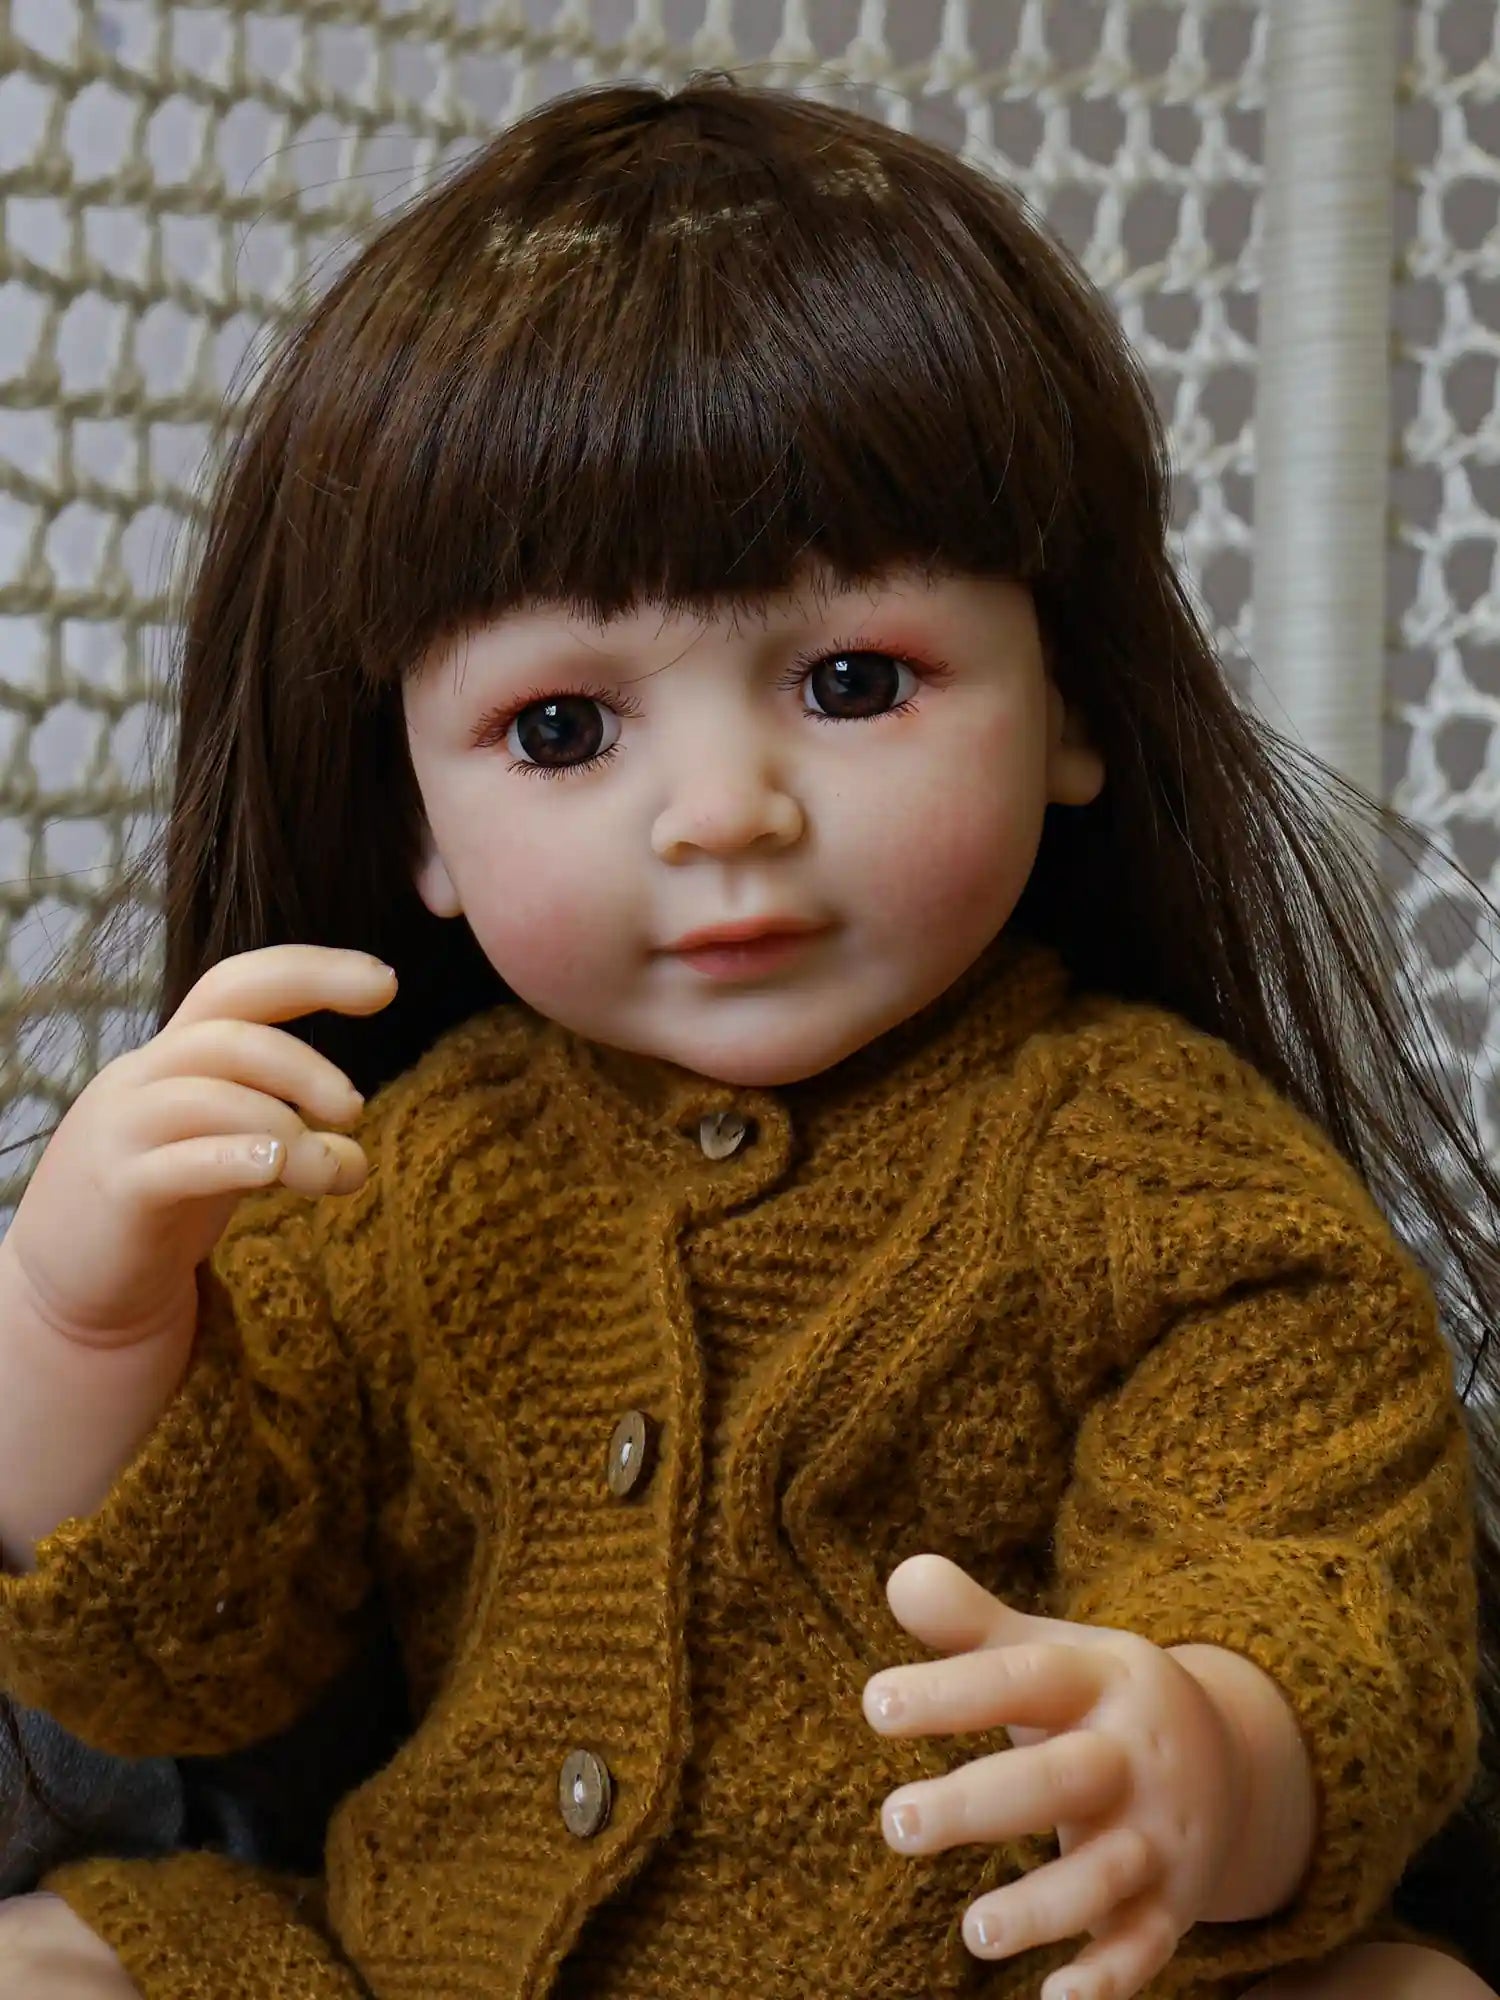 Artfully crafted doll resembling a seated toddler, with long brown hair under a yellow pompom hat, dressed in a chunky knit sweater in a warm mustard tone.